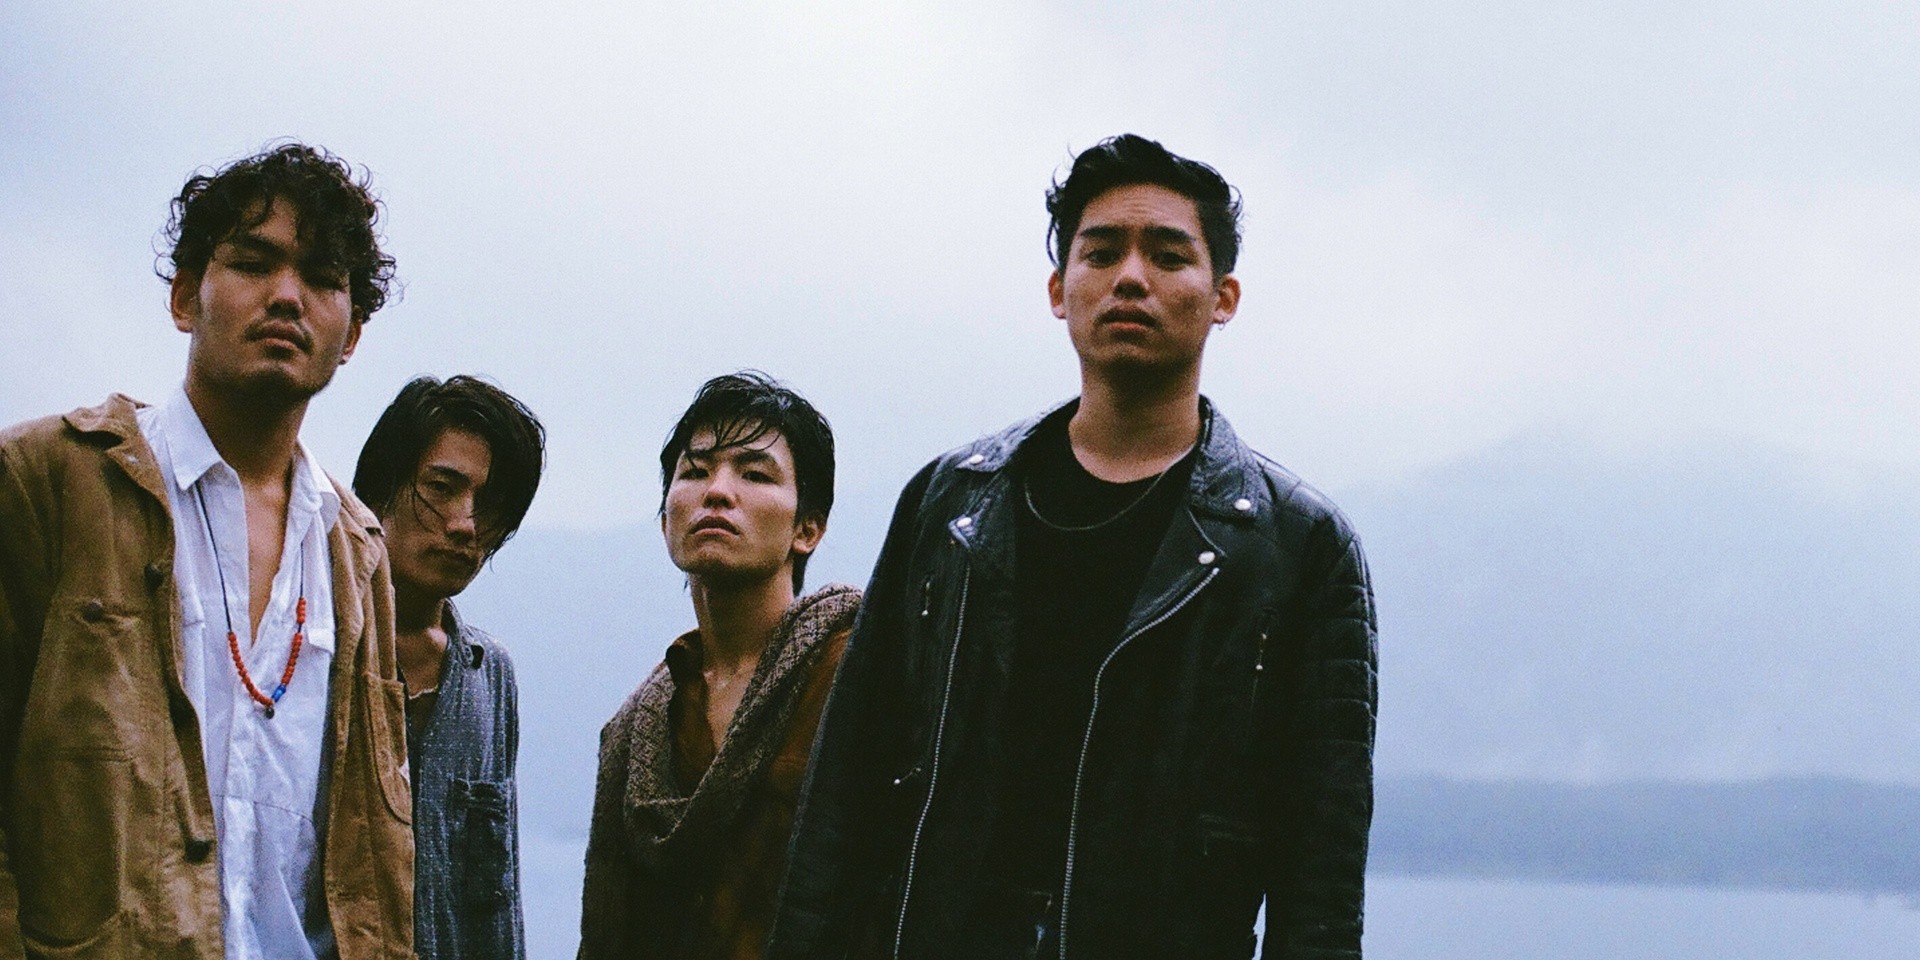 Japanese dream pop band The fin. to perform in Singapore